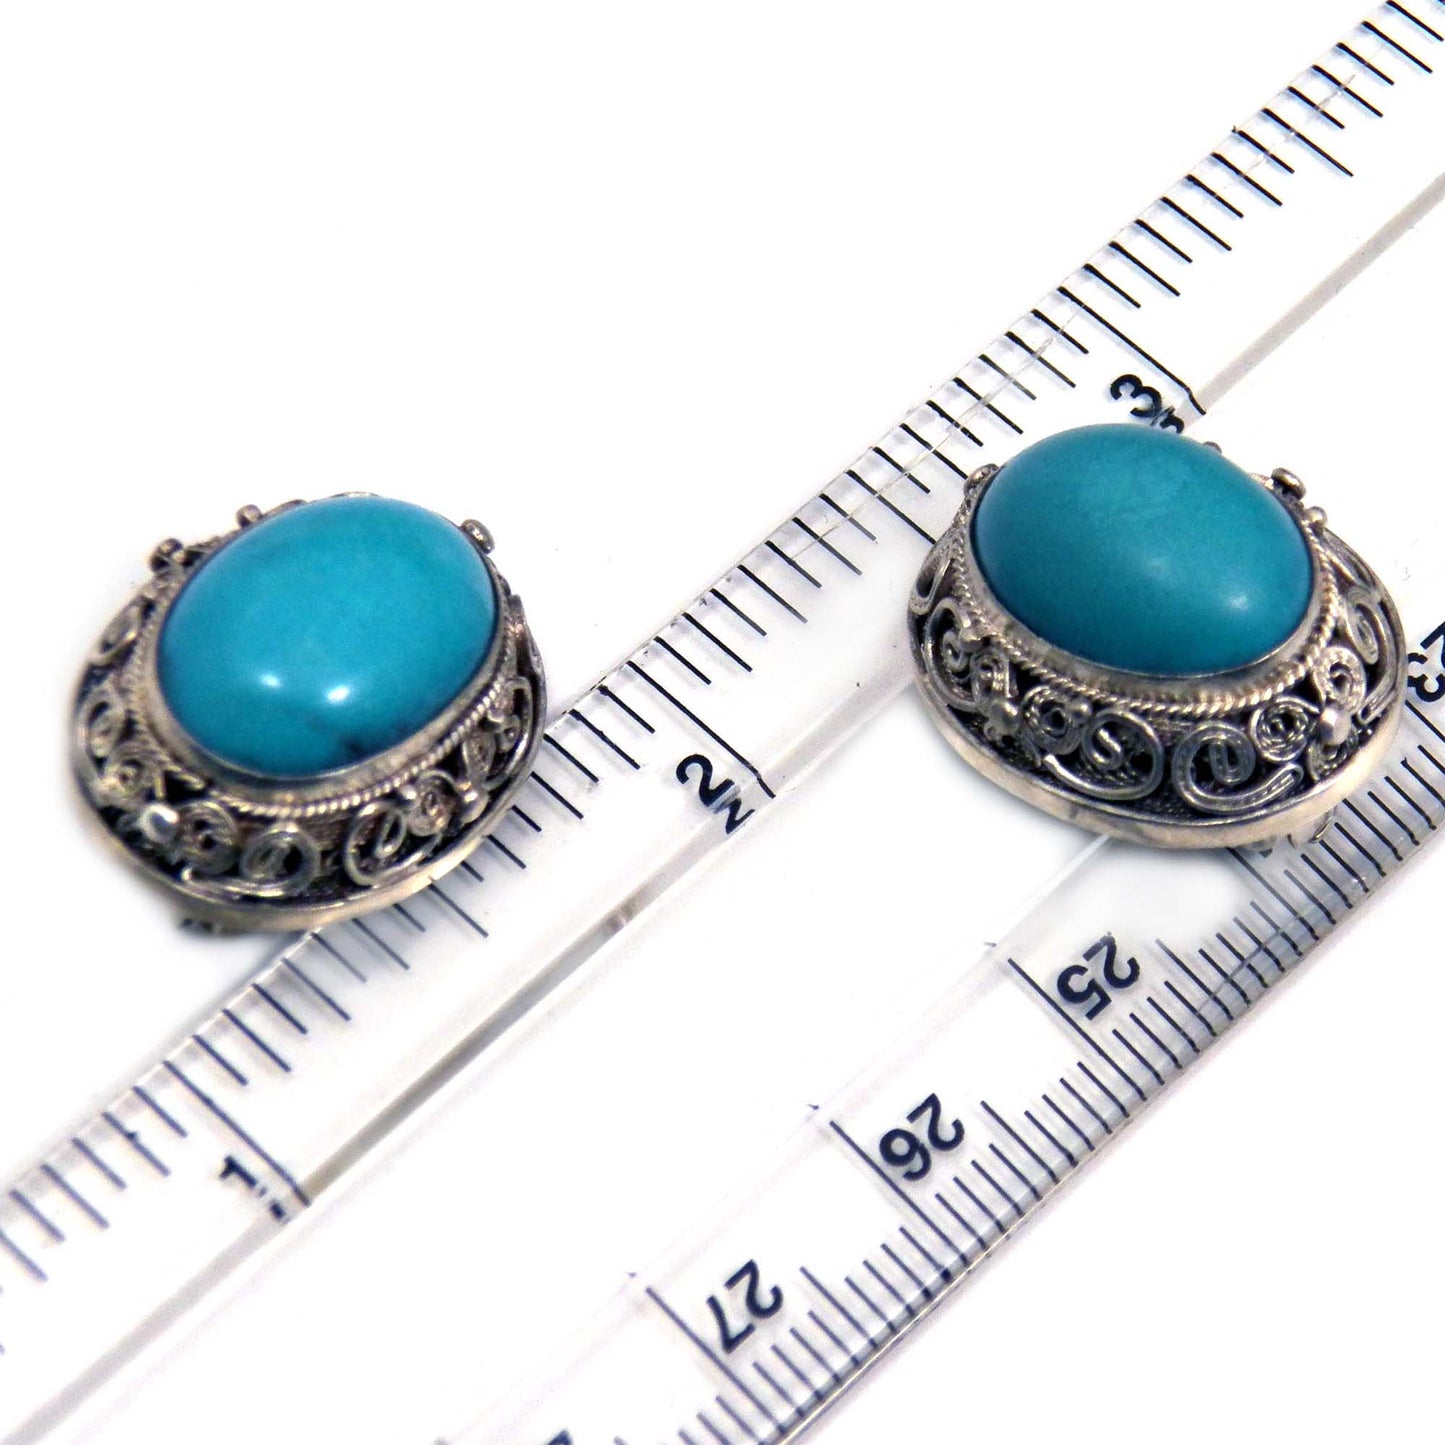 Antique Chinese Turquoise Clip on Earrings, Silver Filigree Vintage Jewelry 1930s